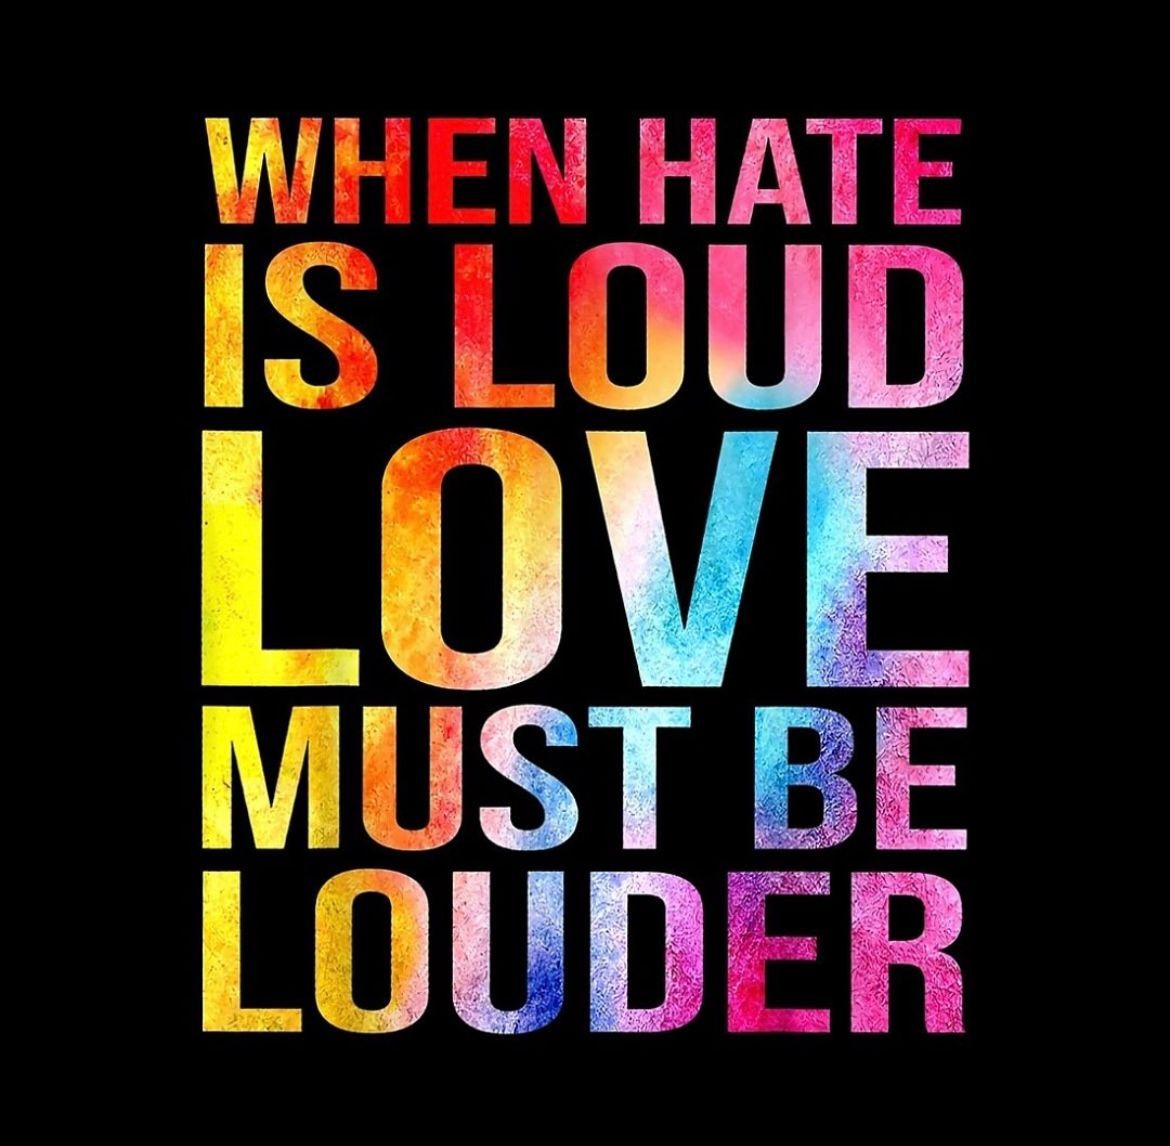 When hate is loud, love must be louder. Reposted from @nationalnow. #CNYNOW #LGBTQ #LGBTQIA #Equality #EqualRights #EqualAccess #LoveIsLove #LGBTQCommunity LGBTQSupport #QueerPride